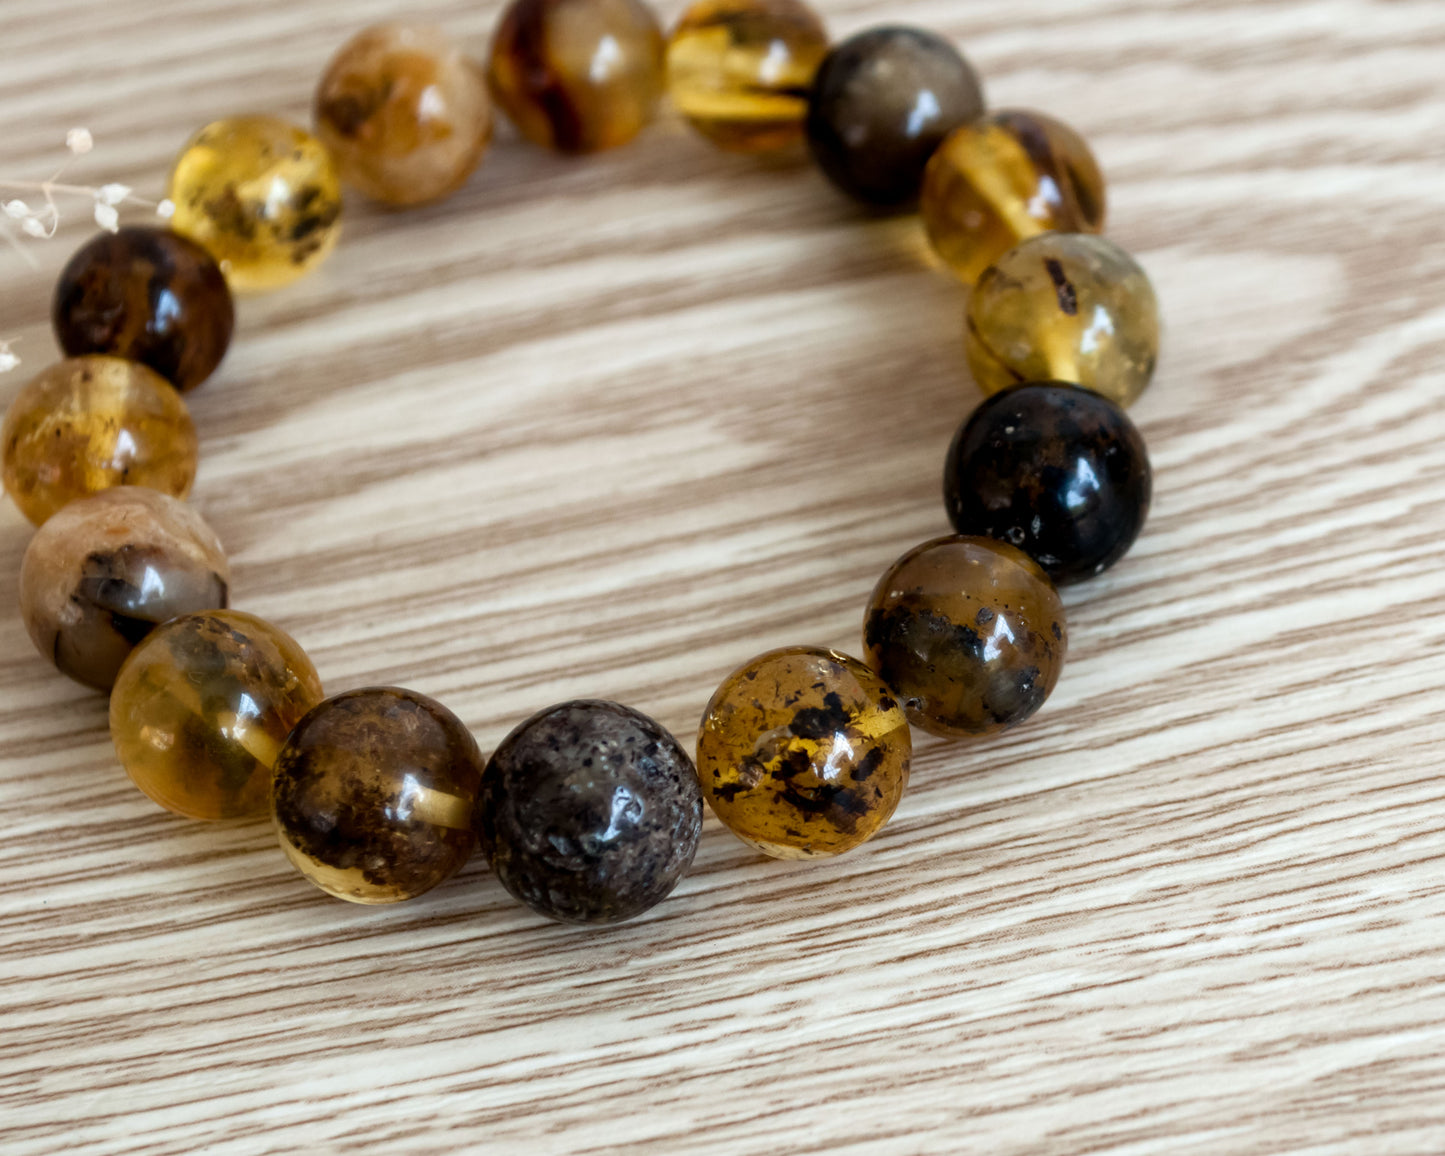 Handmade Cognac Color Charm Bracelet with Round Shape Natural Baltic Amber Gemstone Beads